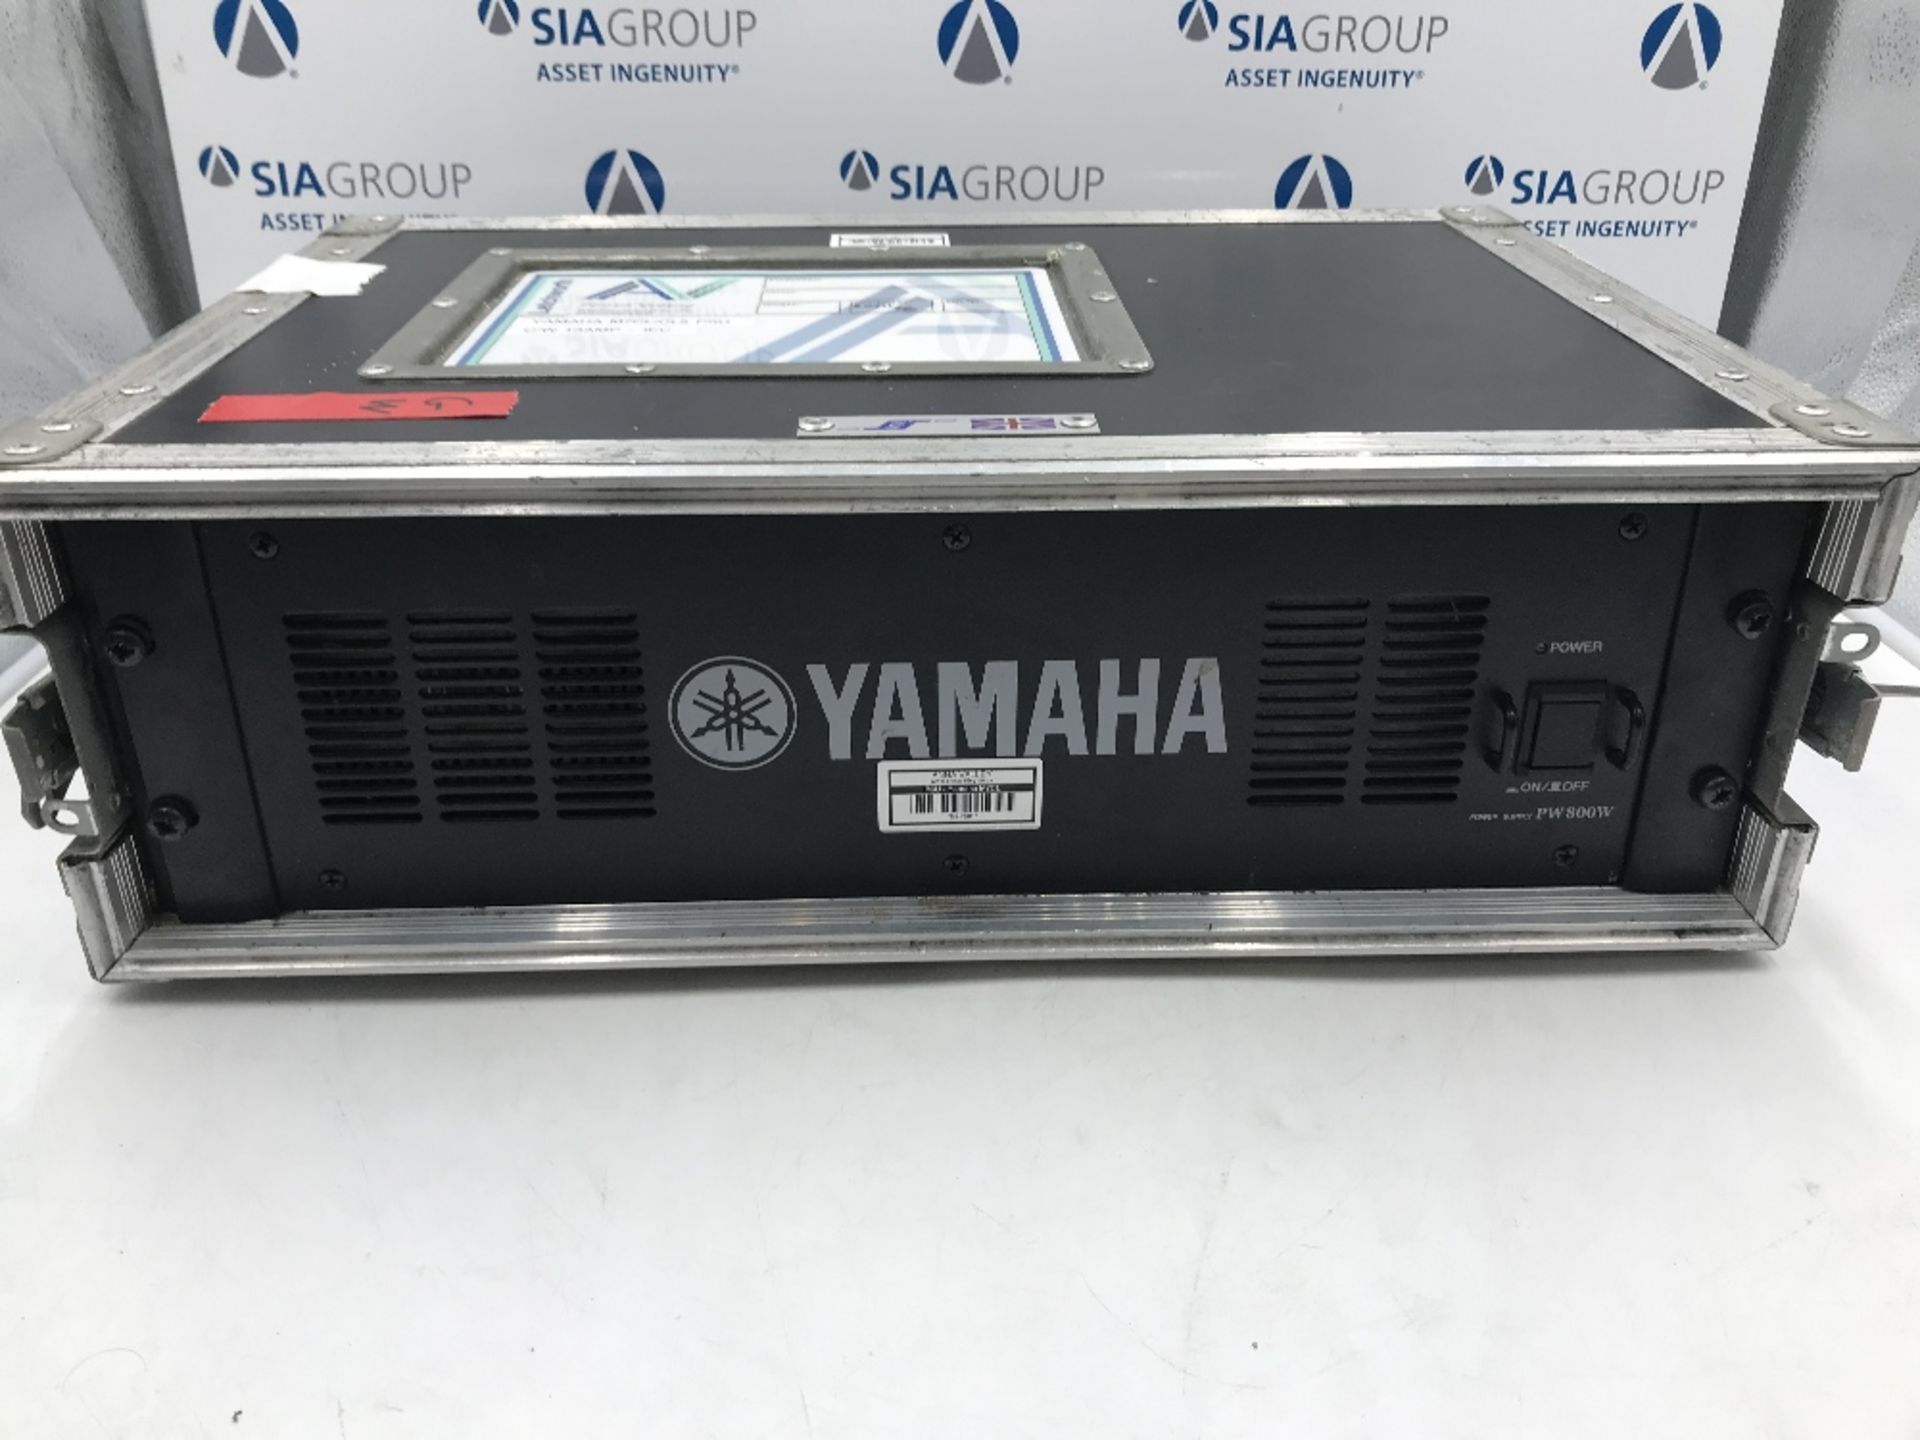 Yamaha PW800W Power Supply Housed In Heavy Duty Carry Case - Image 4 of 5